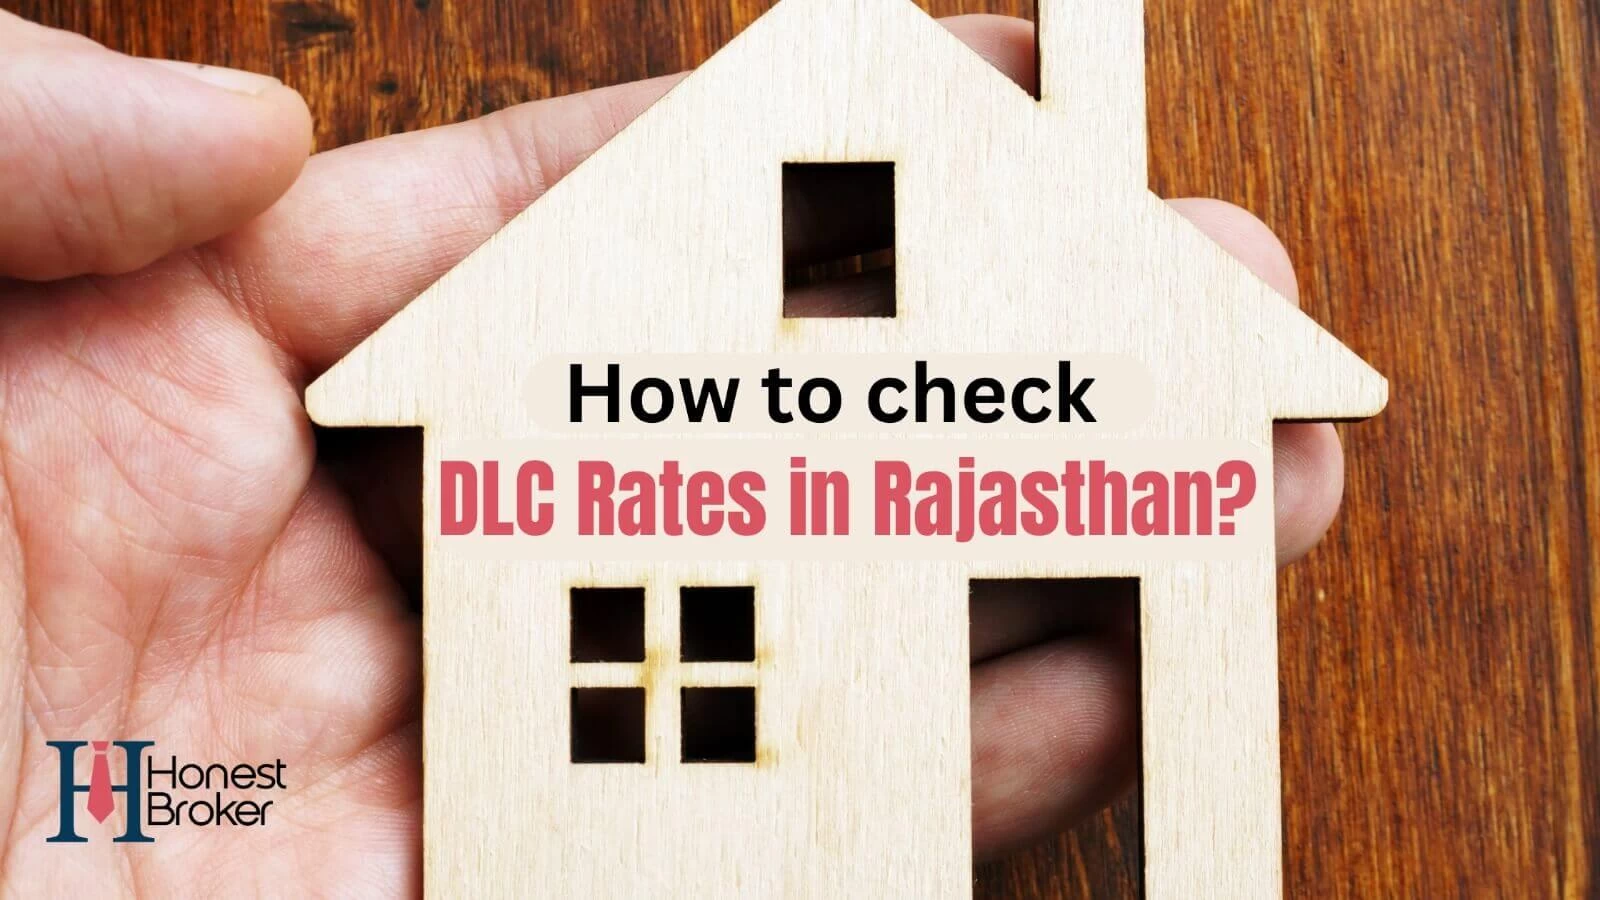 How to check DLC Rates in Rajasthan?